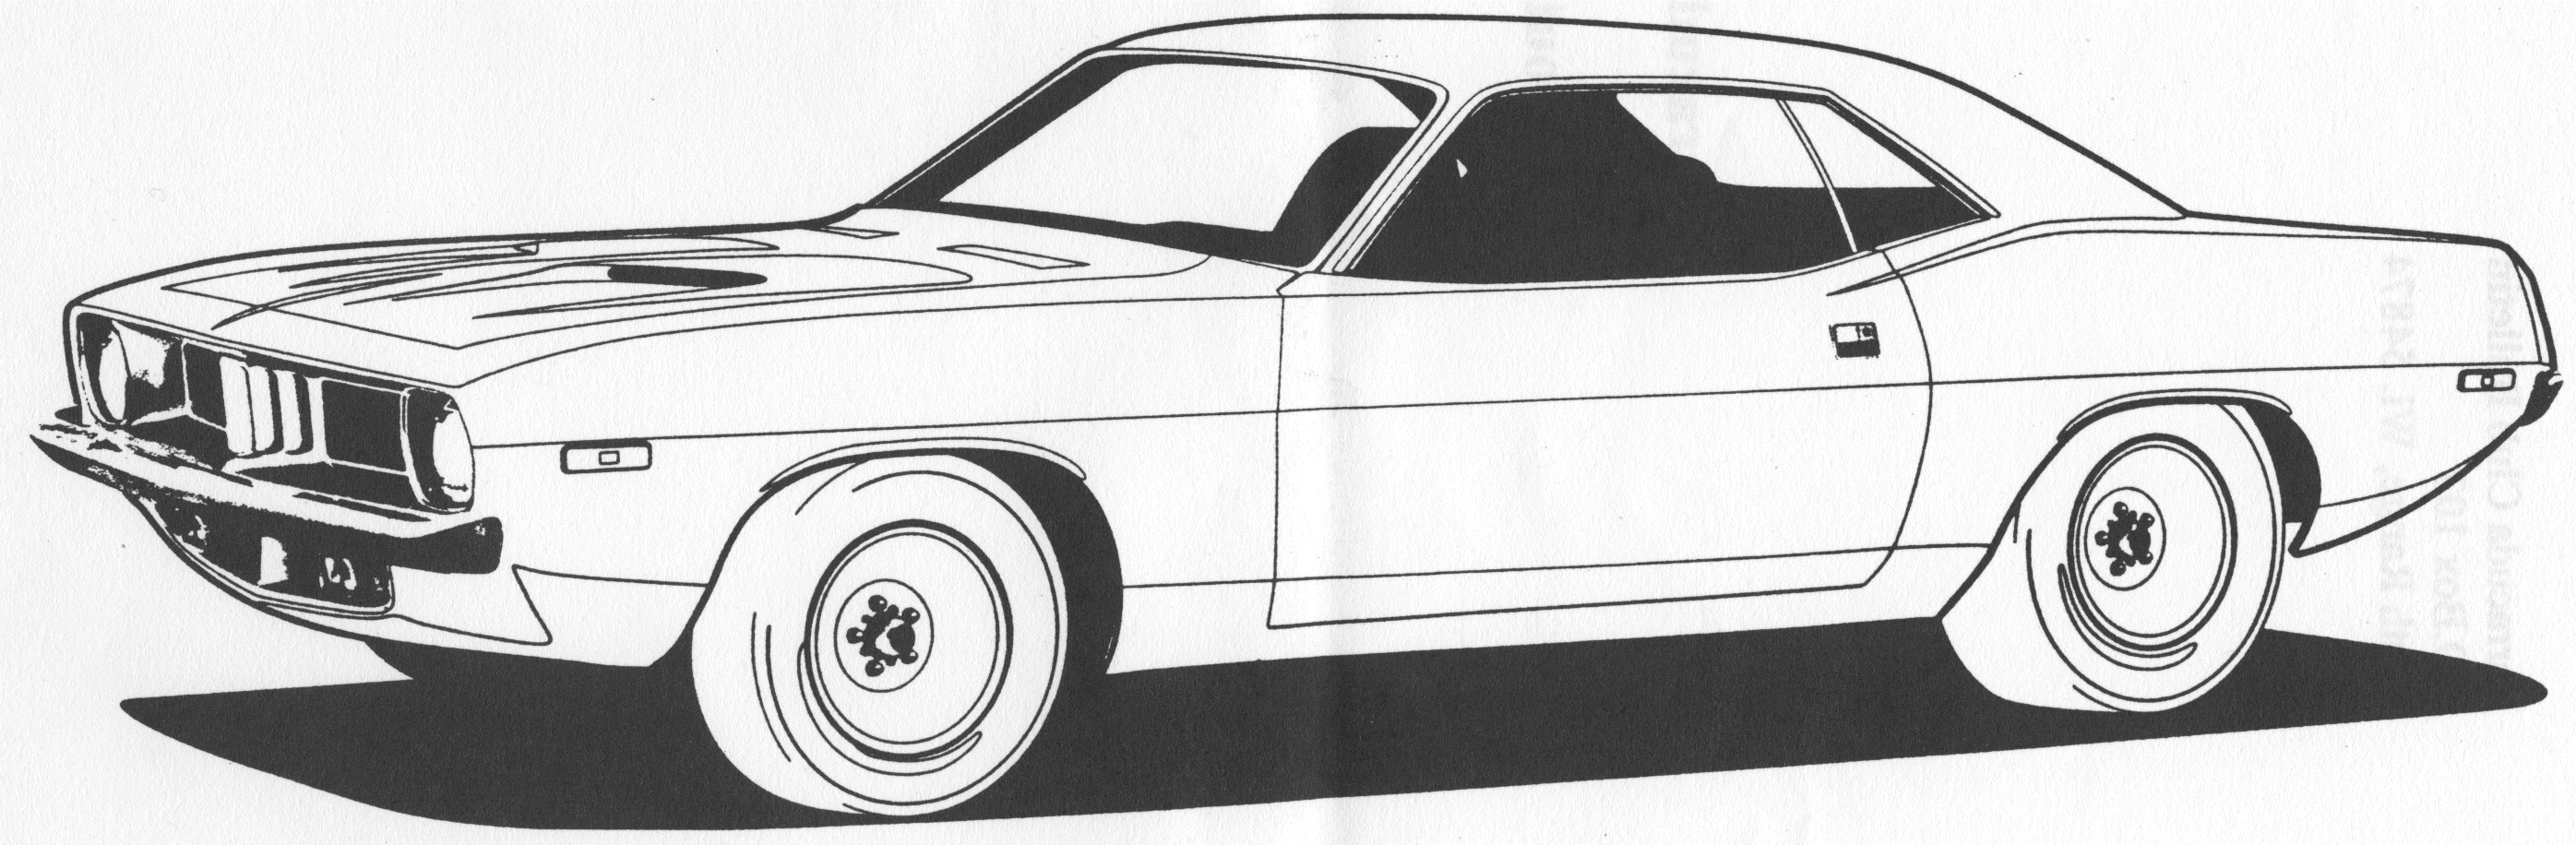 Muscle Car Coloring Sheets   Vehicle Pictures